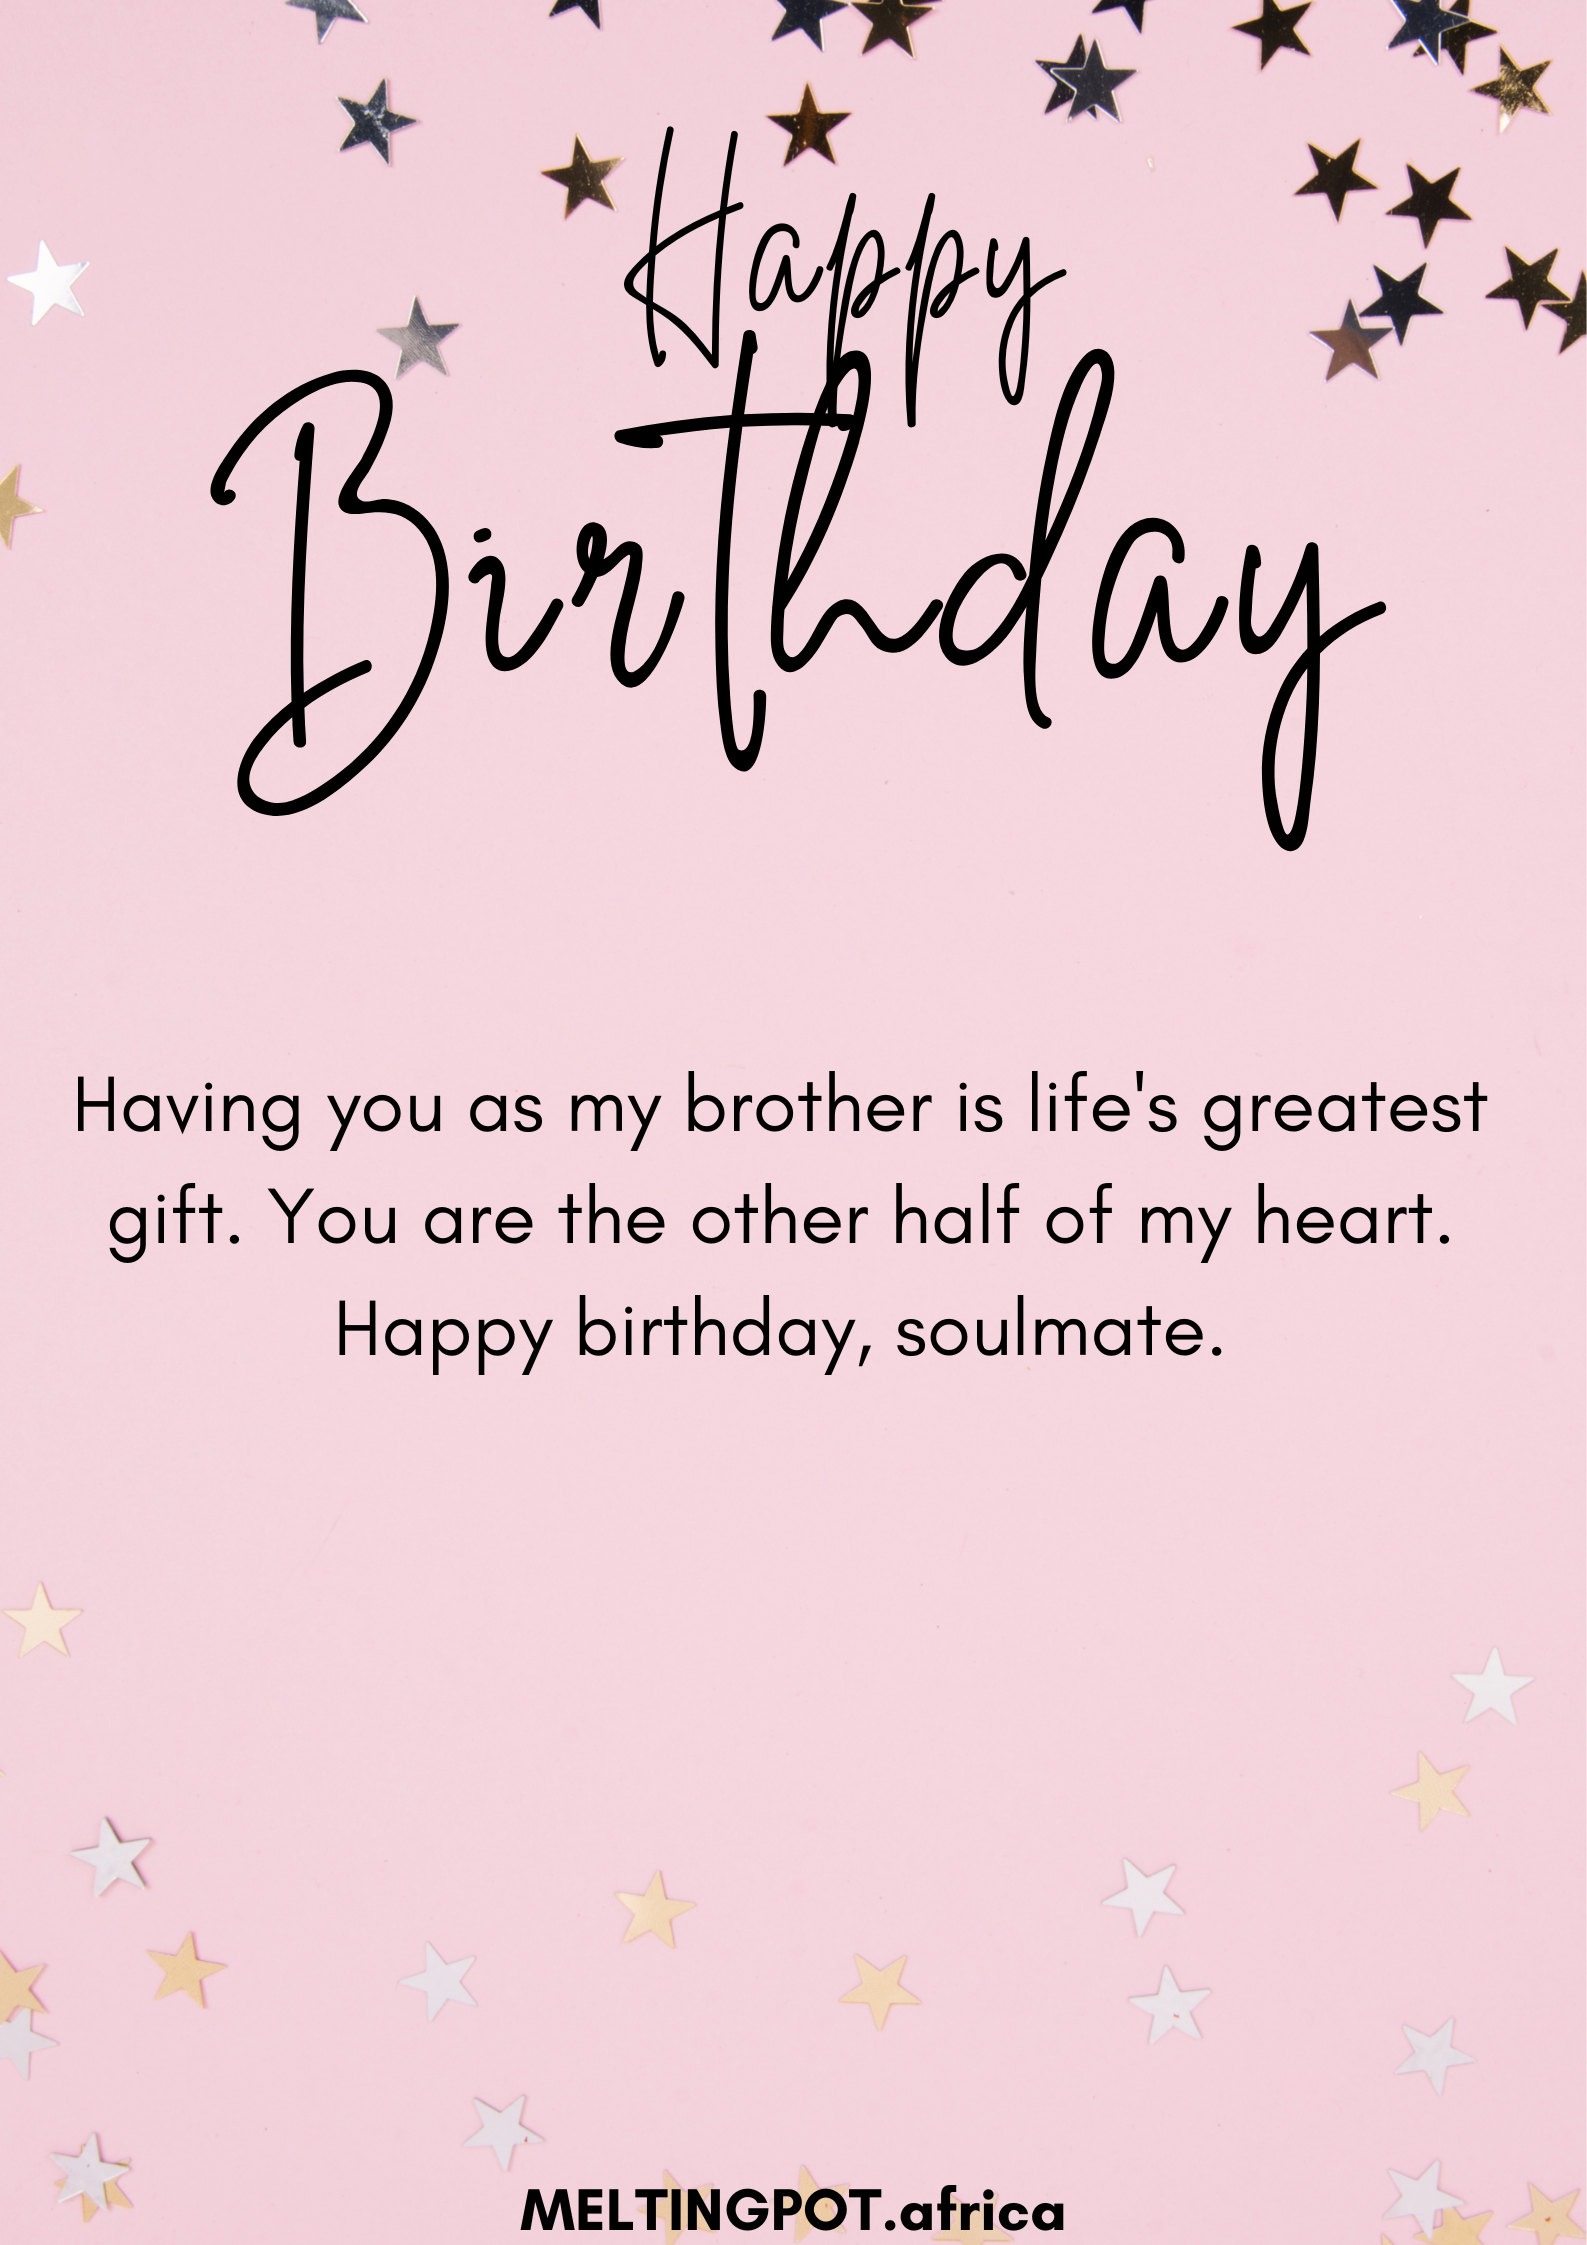 Heart Touching Birthday Wishes For Younger Brother